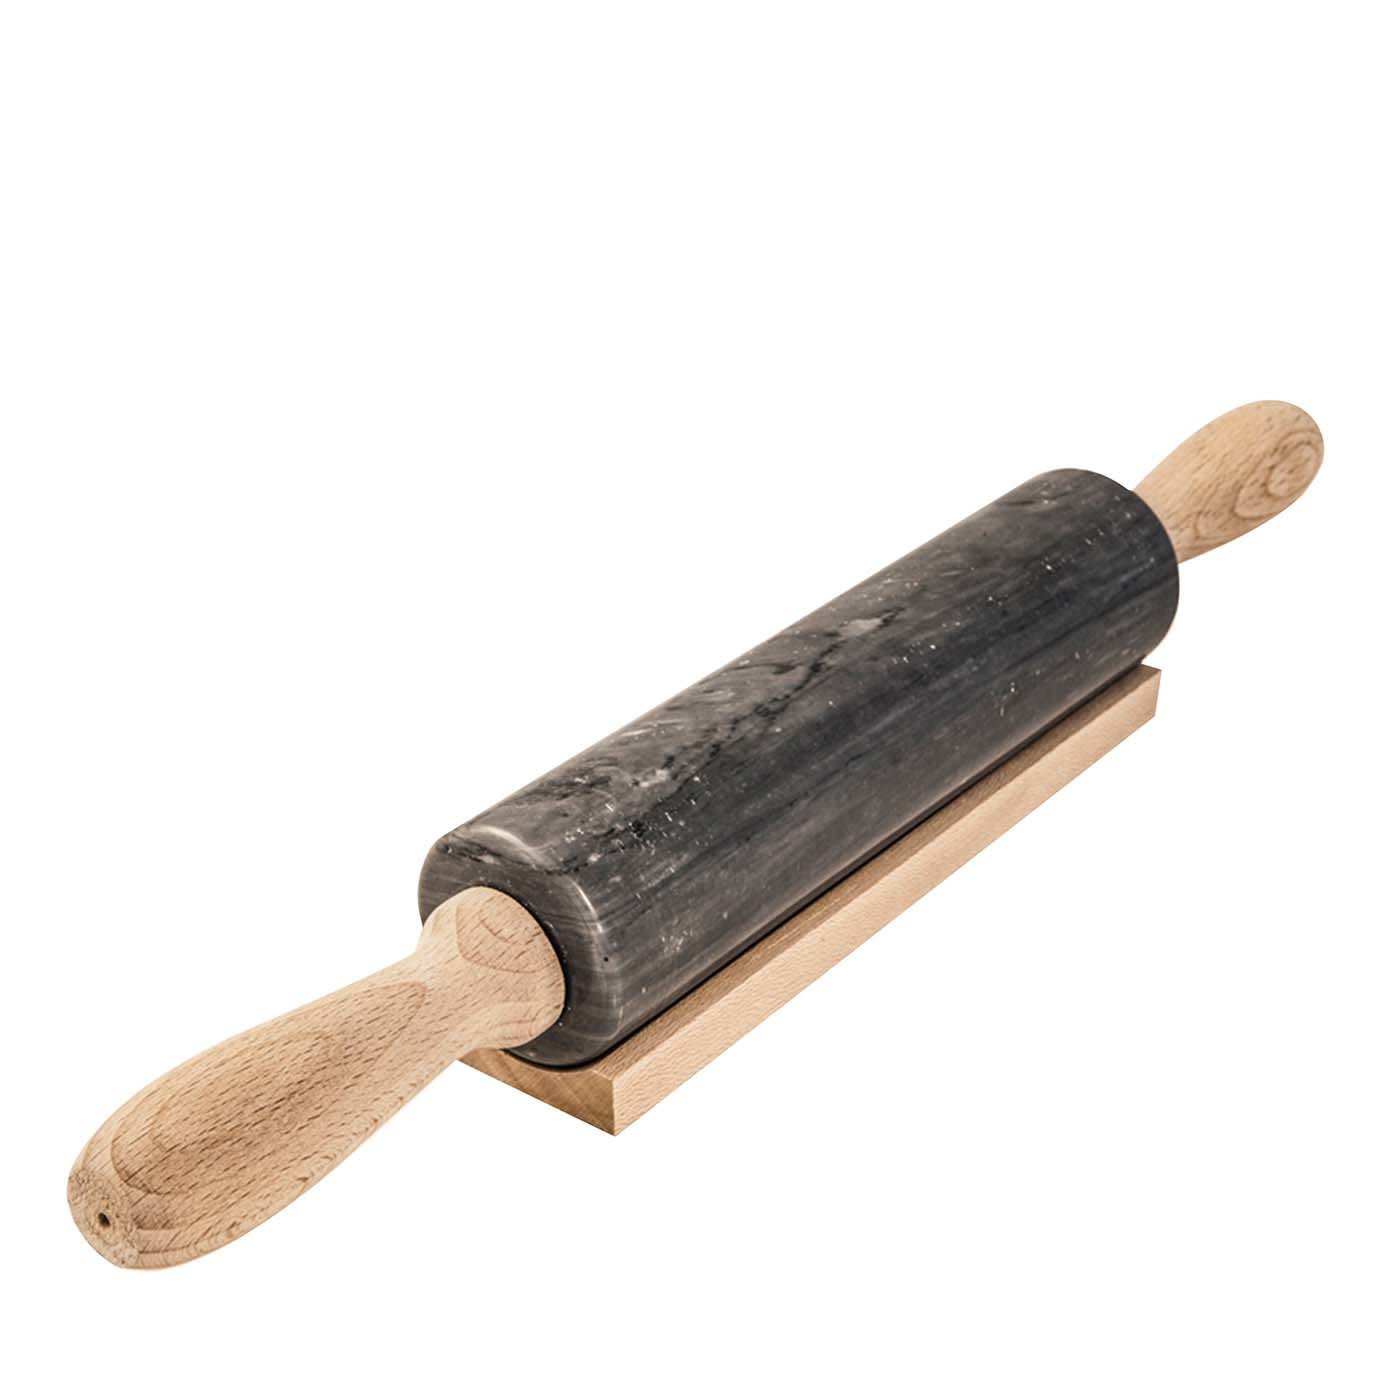 Grey Marble Rolling Pin with Wooden Handle - FiammettaV Home Collection